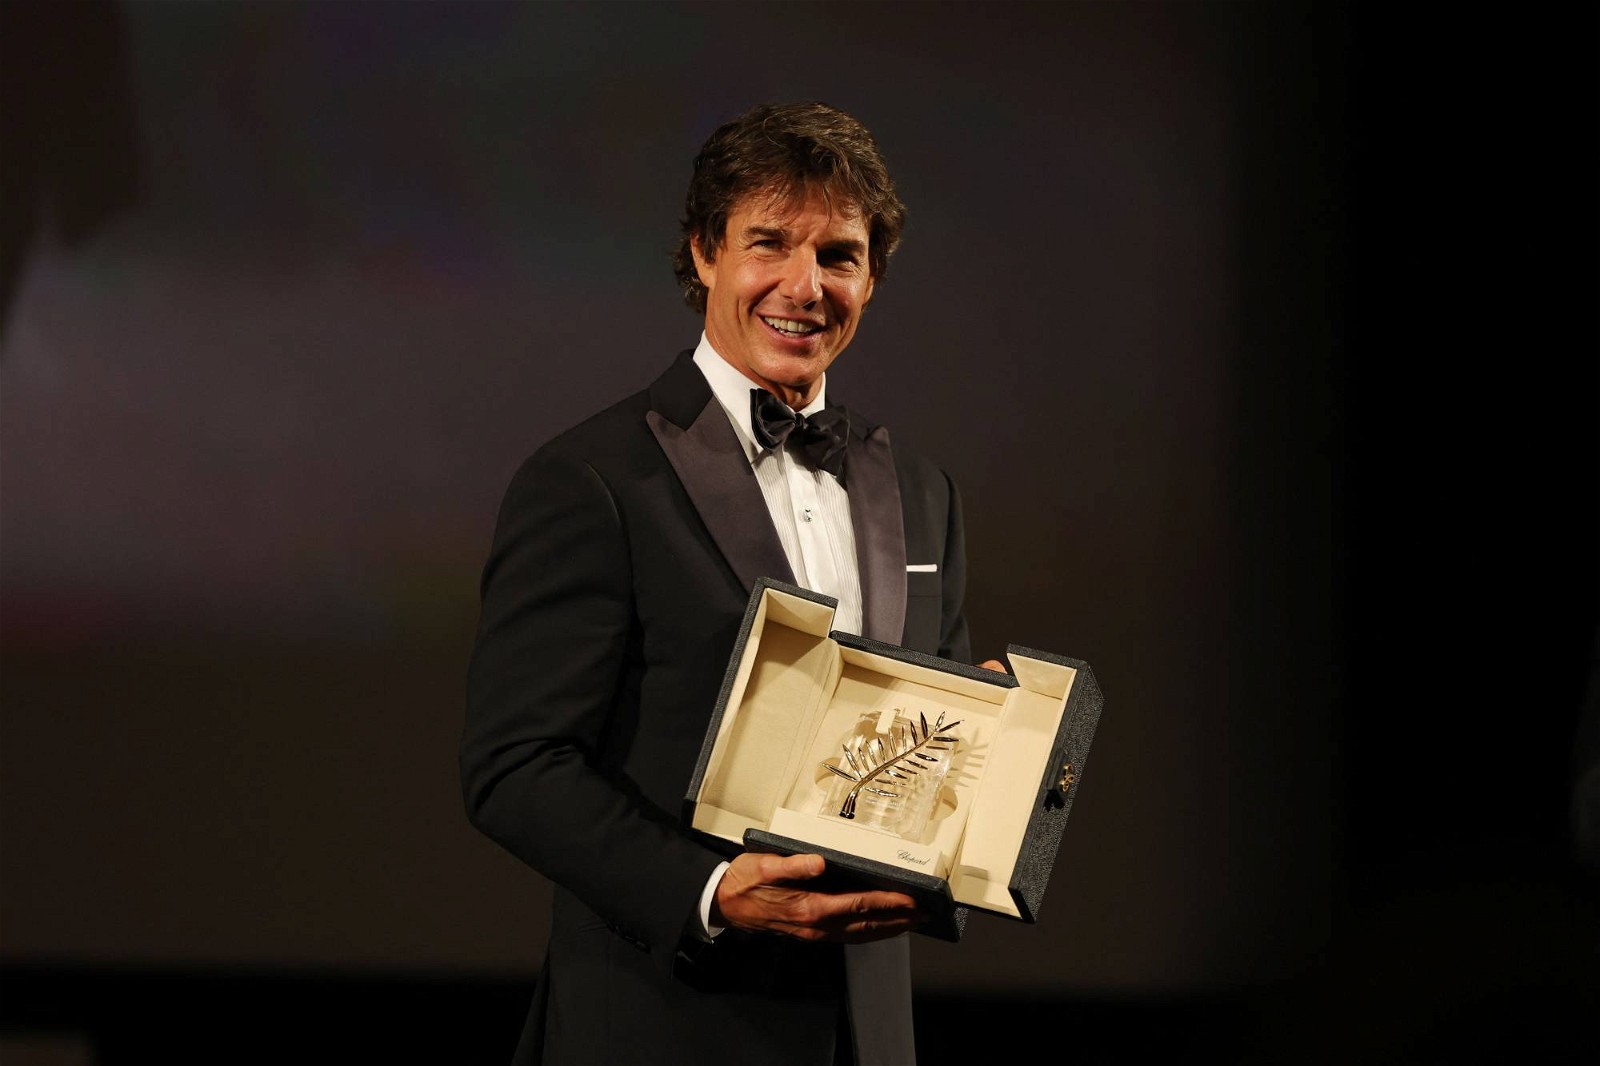 Tom Cruise receives the honorary Palme d'Or at Cannes '22